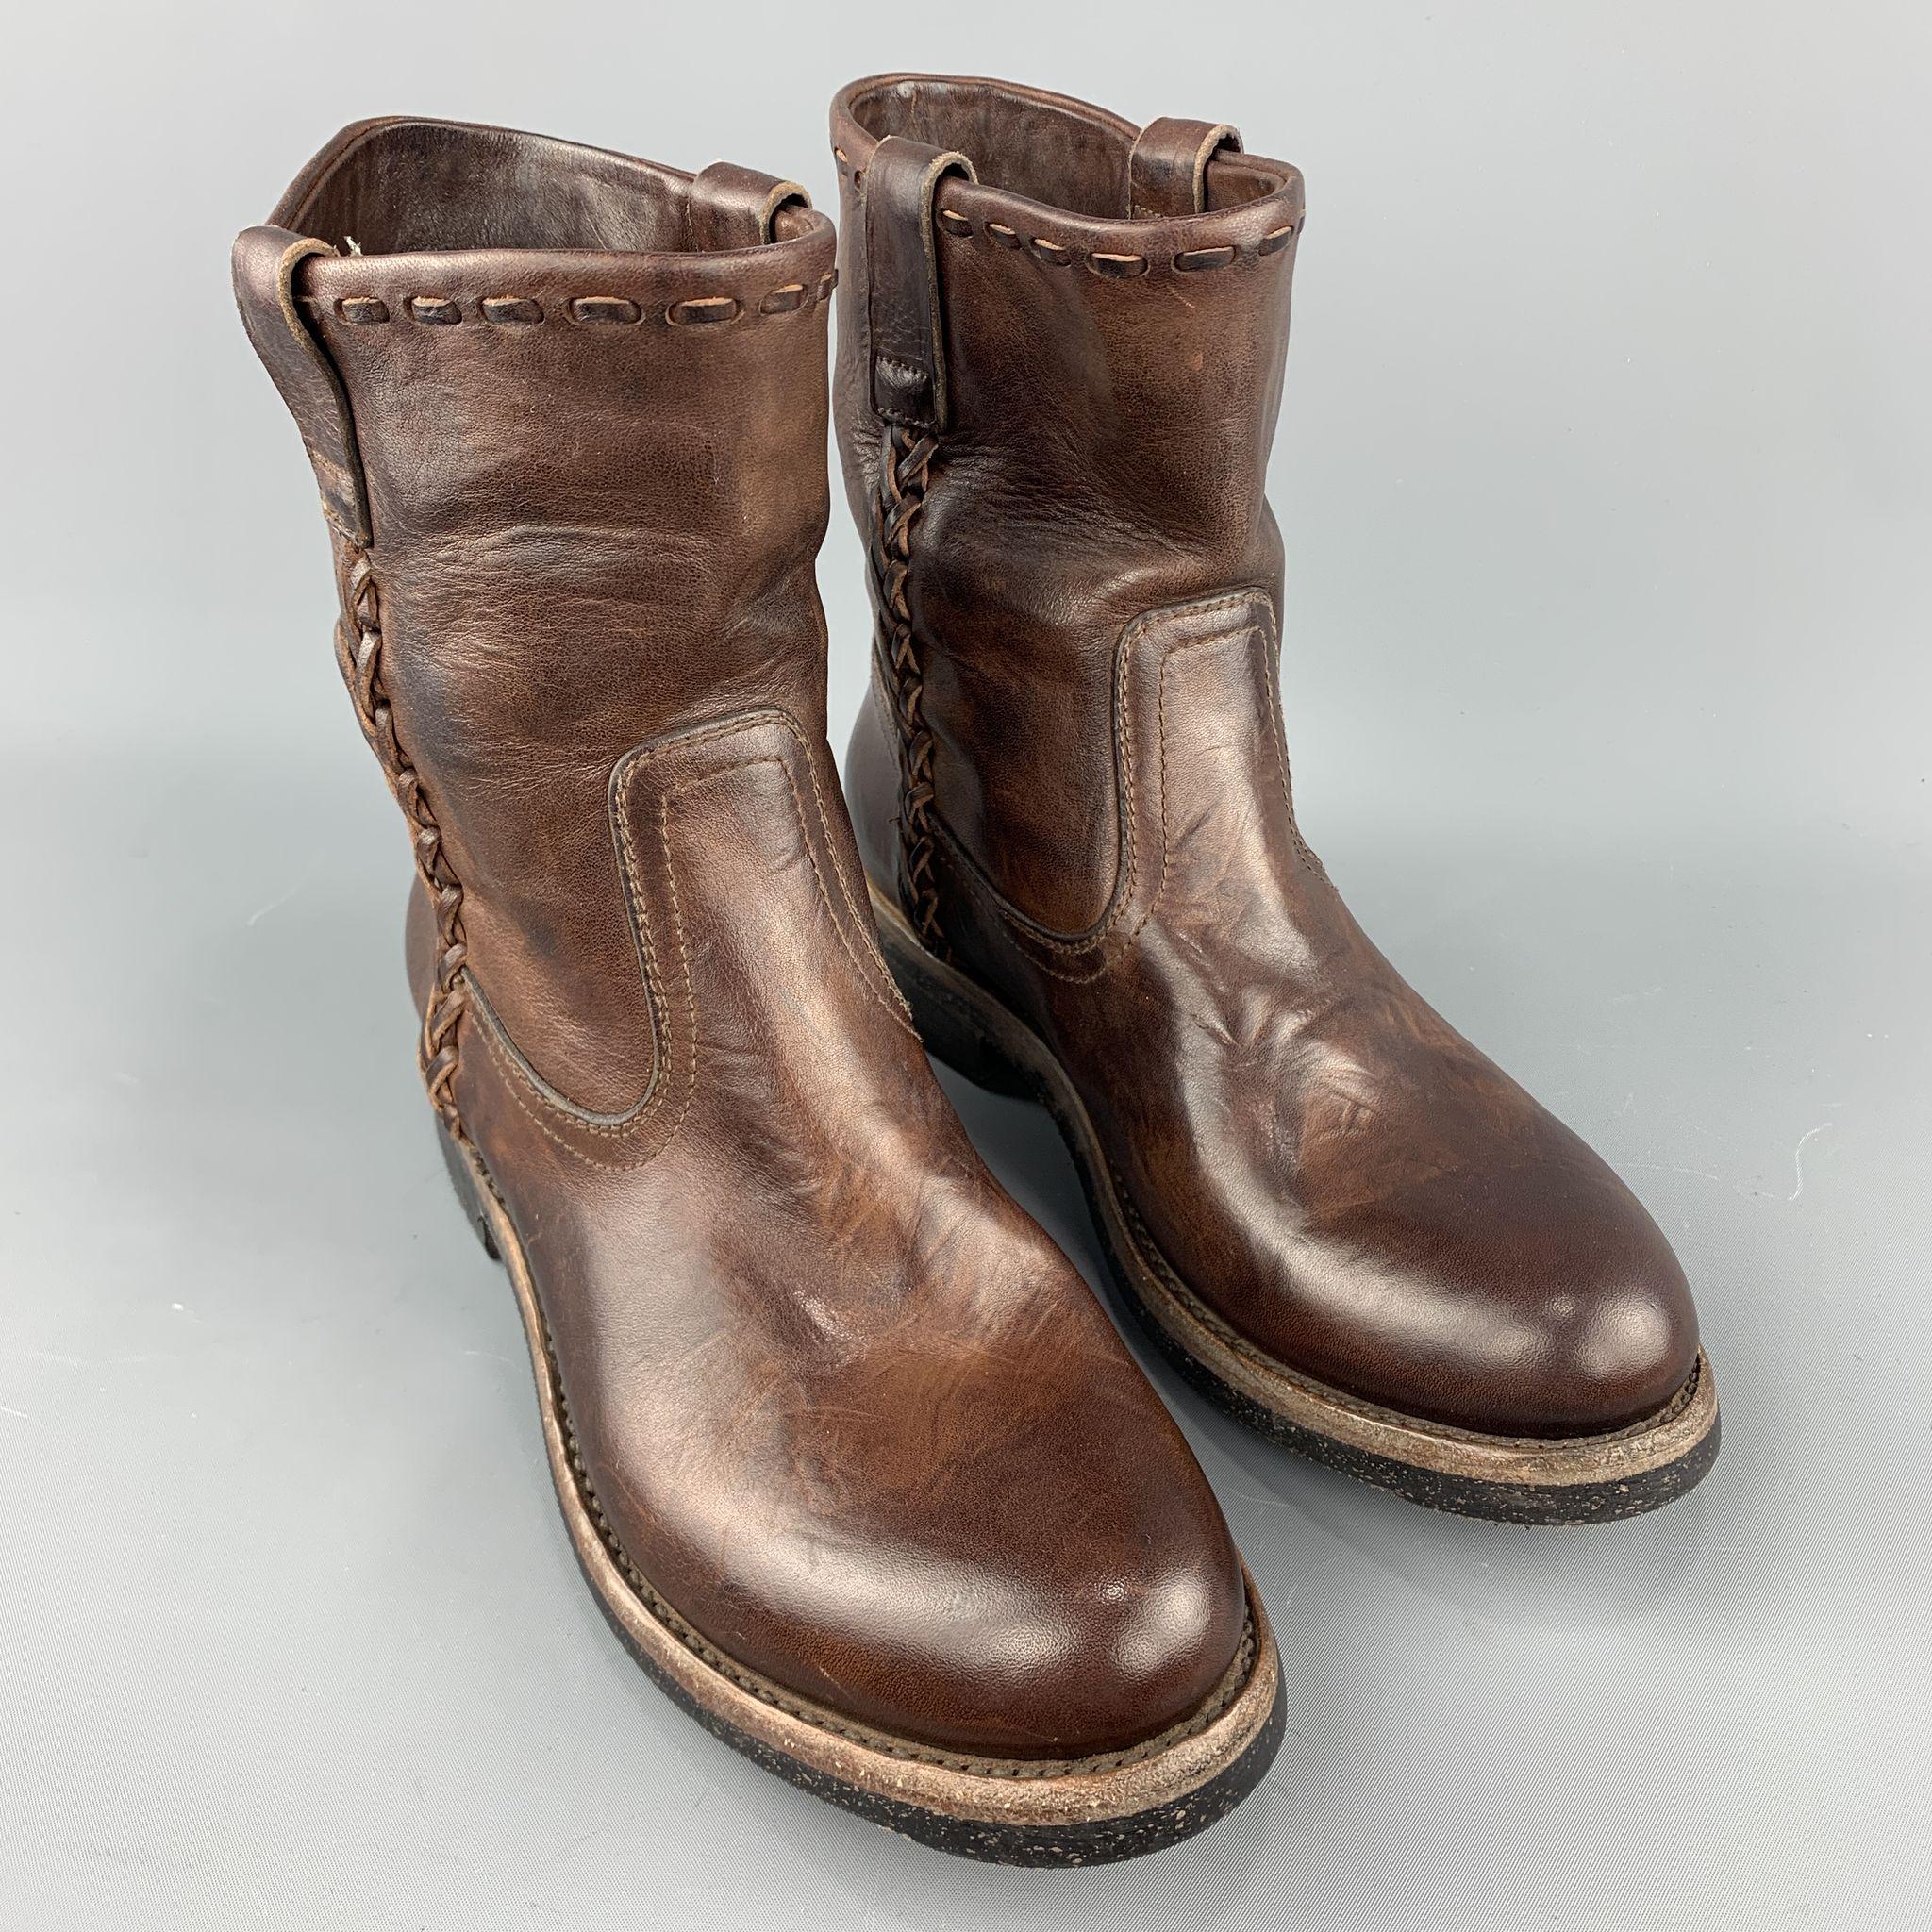 RALPH LAUREN boots comes in a brown antique leather featuring a ankle style, side braid details, and a rubber sole. Made in Italy.
 
Comes With Box.
Marked: 8
 
Measurements:
 
Width: 4 in.
Height: 8 in.
Length: 11 in.